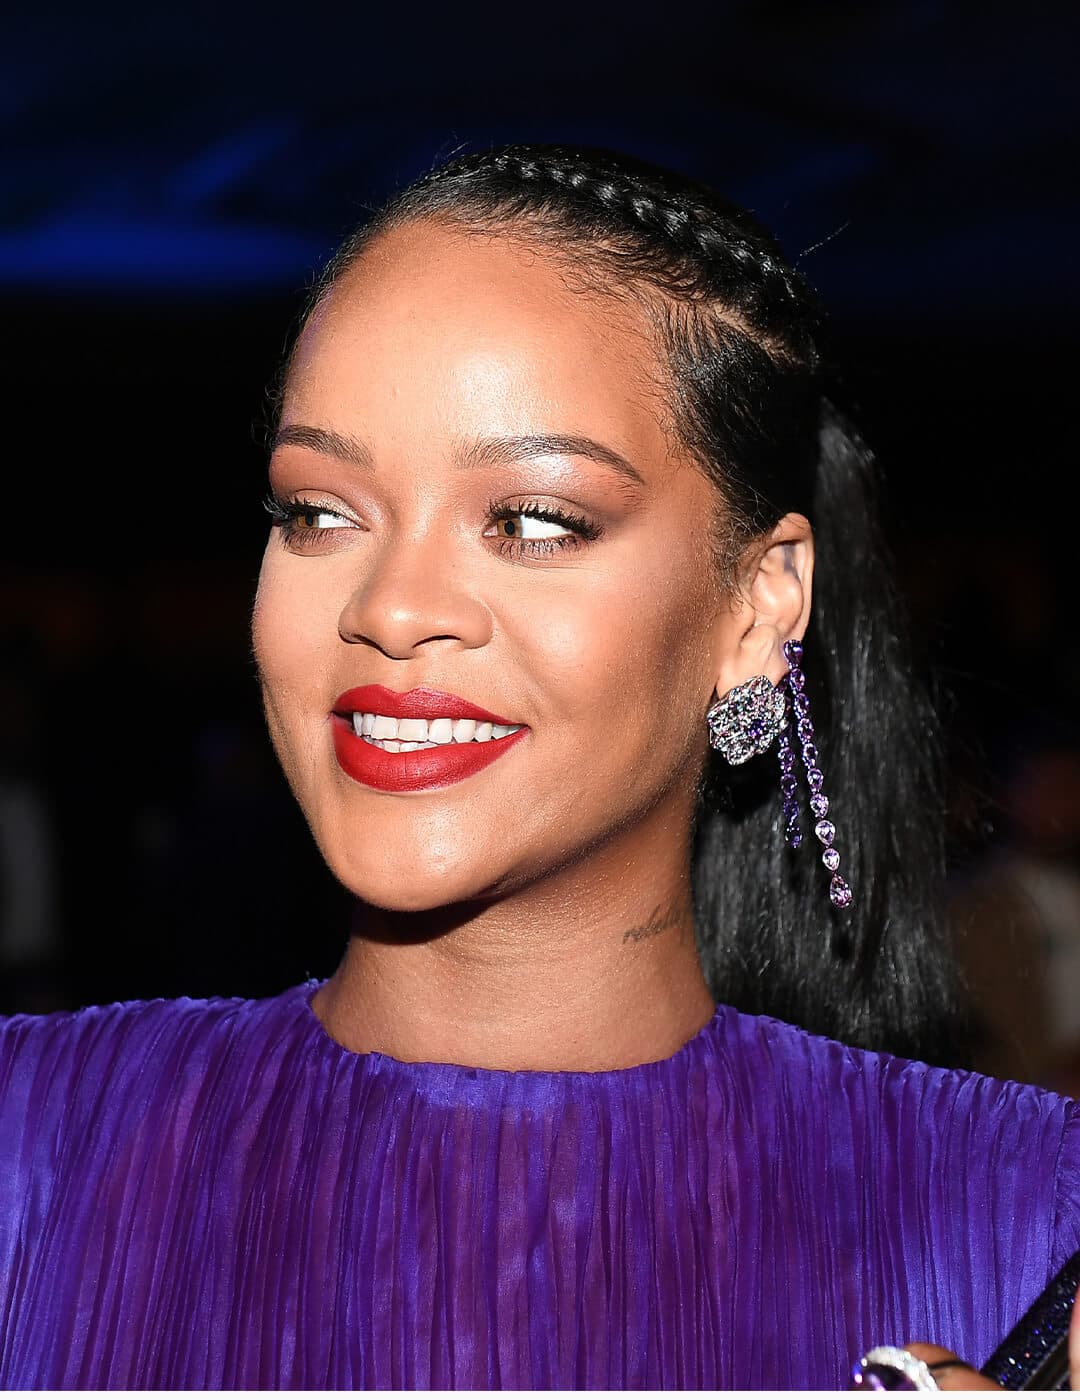 Rihanna looking glamorous in a purple dress and side braided ponytail hairstyle